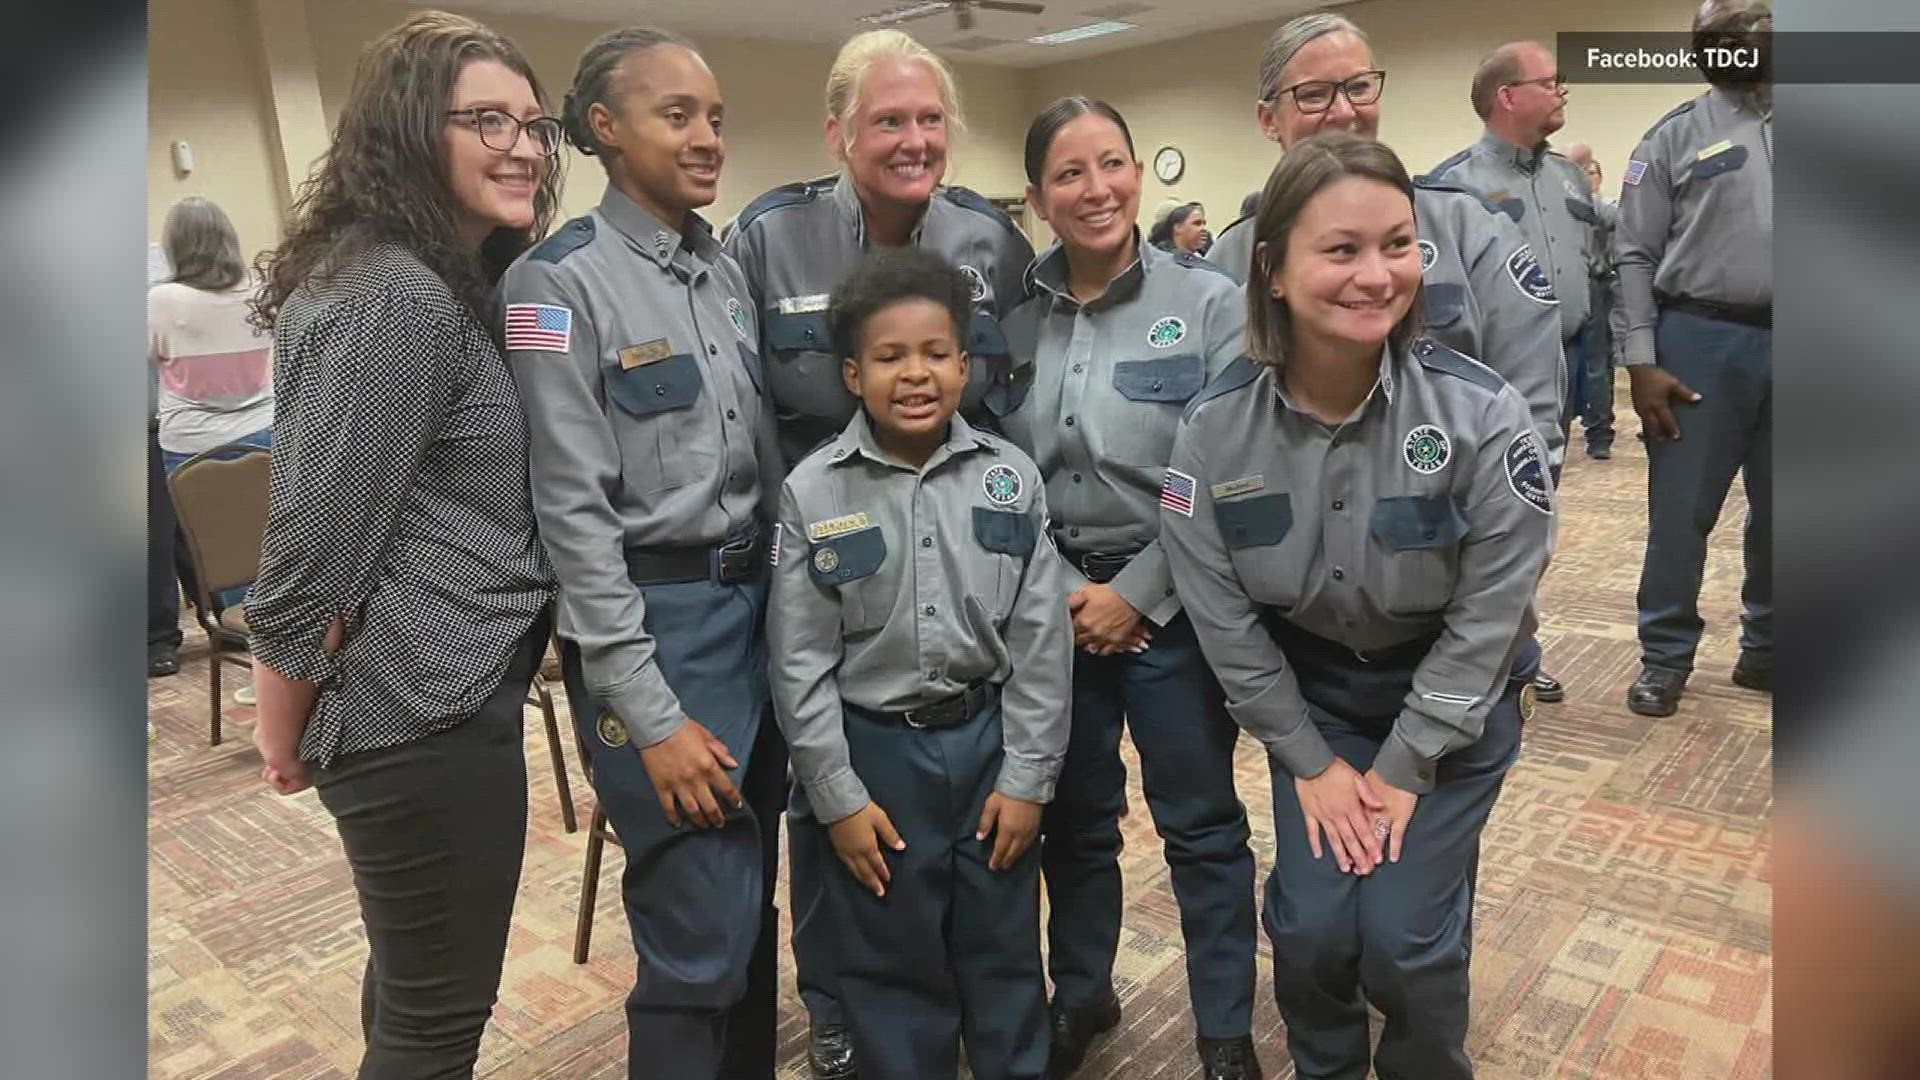 The Texas Department of Criminal Justice has 18 new correctional officers and one of them is a brave 10-year-old boy.